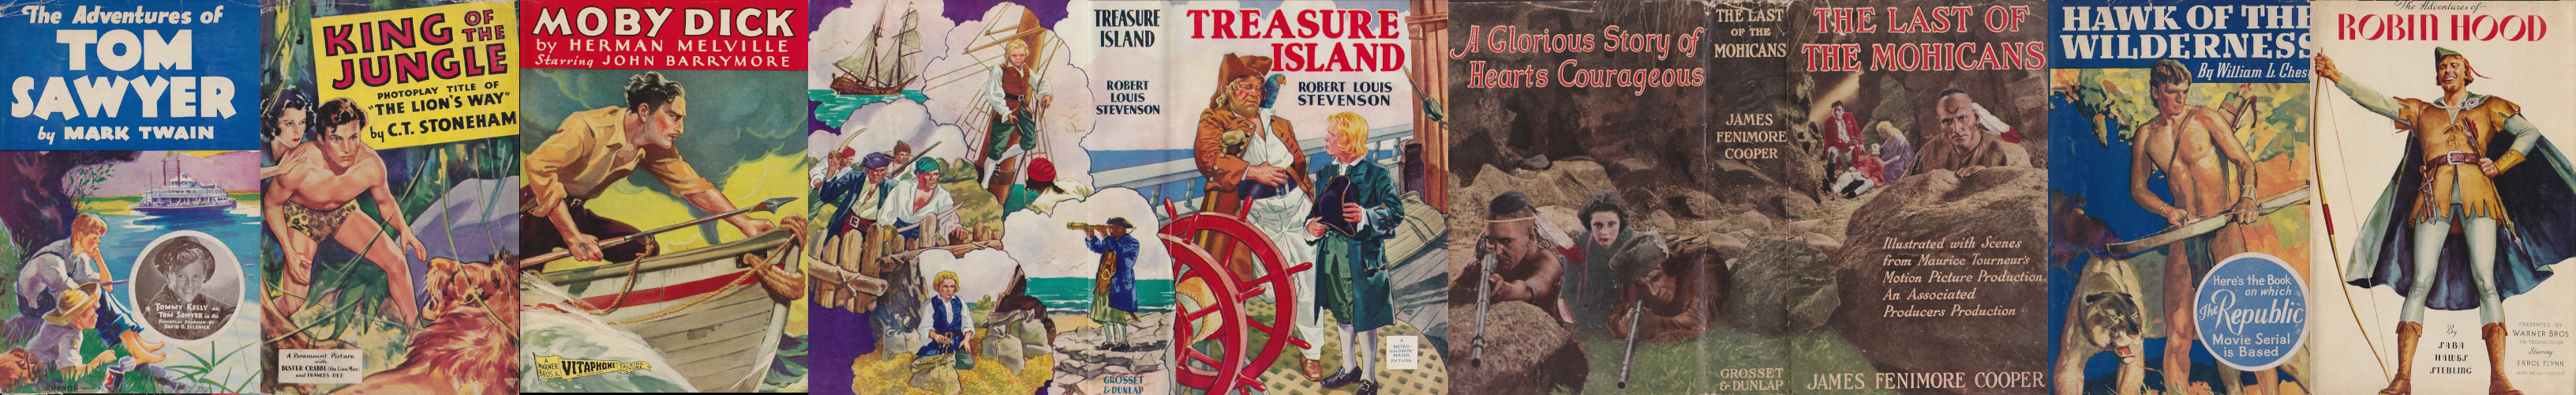 Adventure PhotoPlay Editions Hardcover with Dustjacket